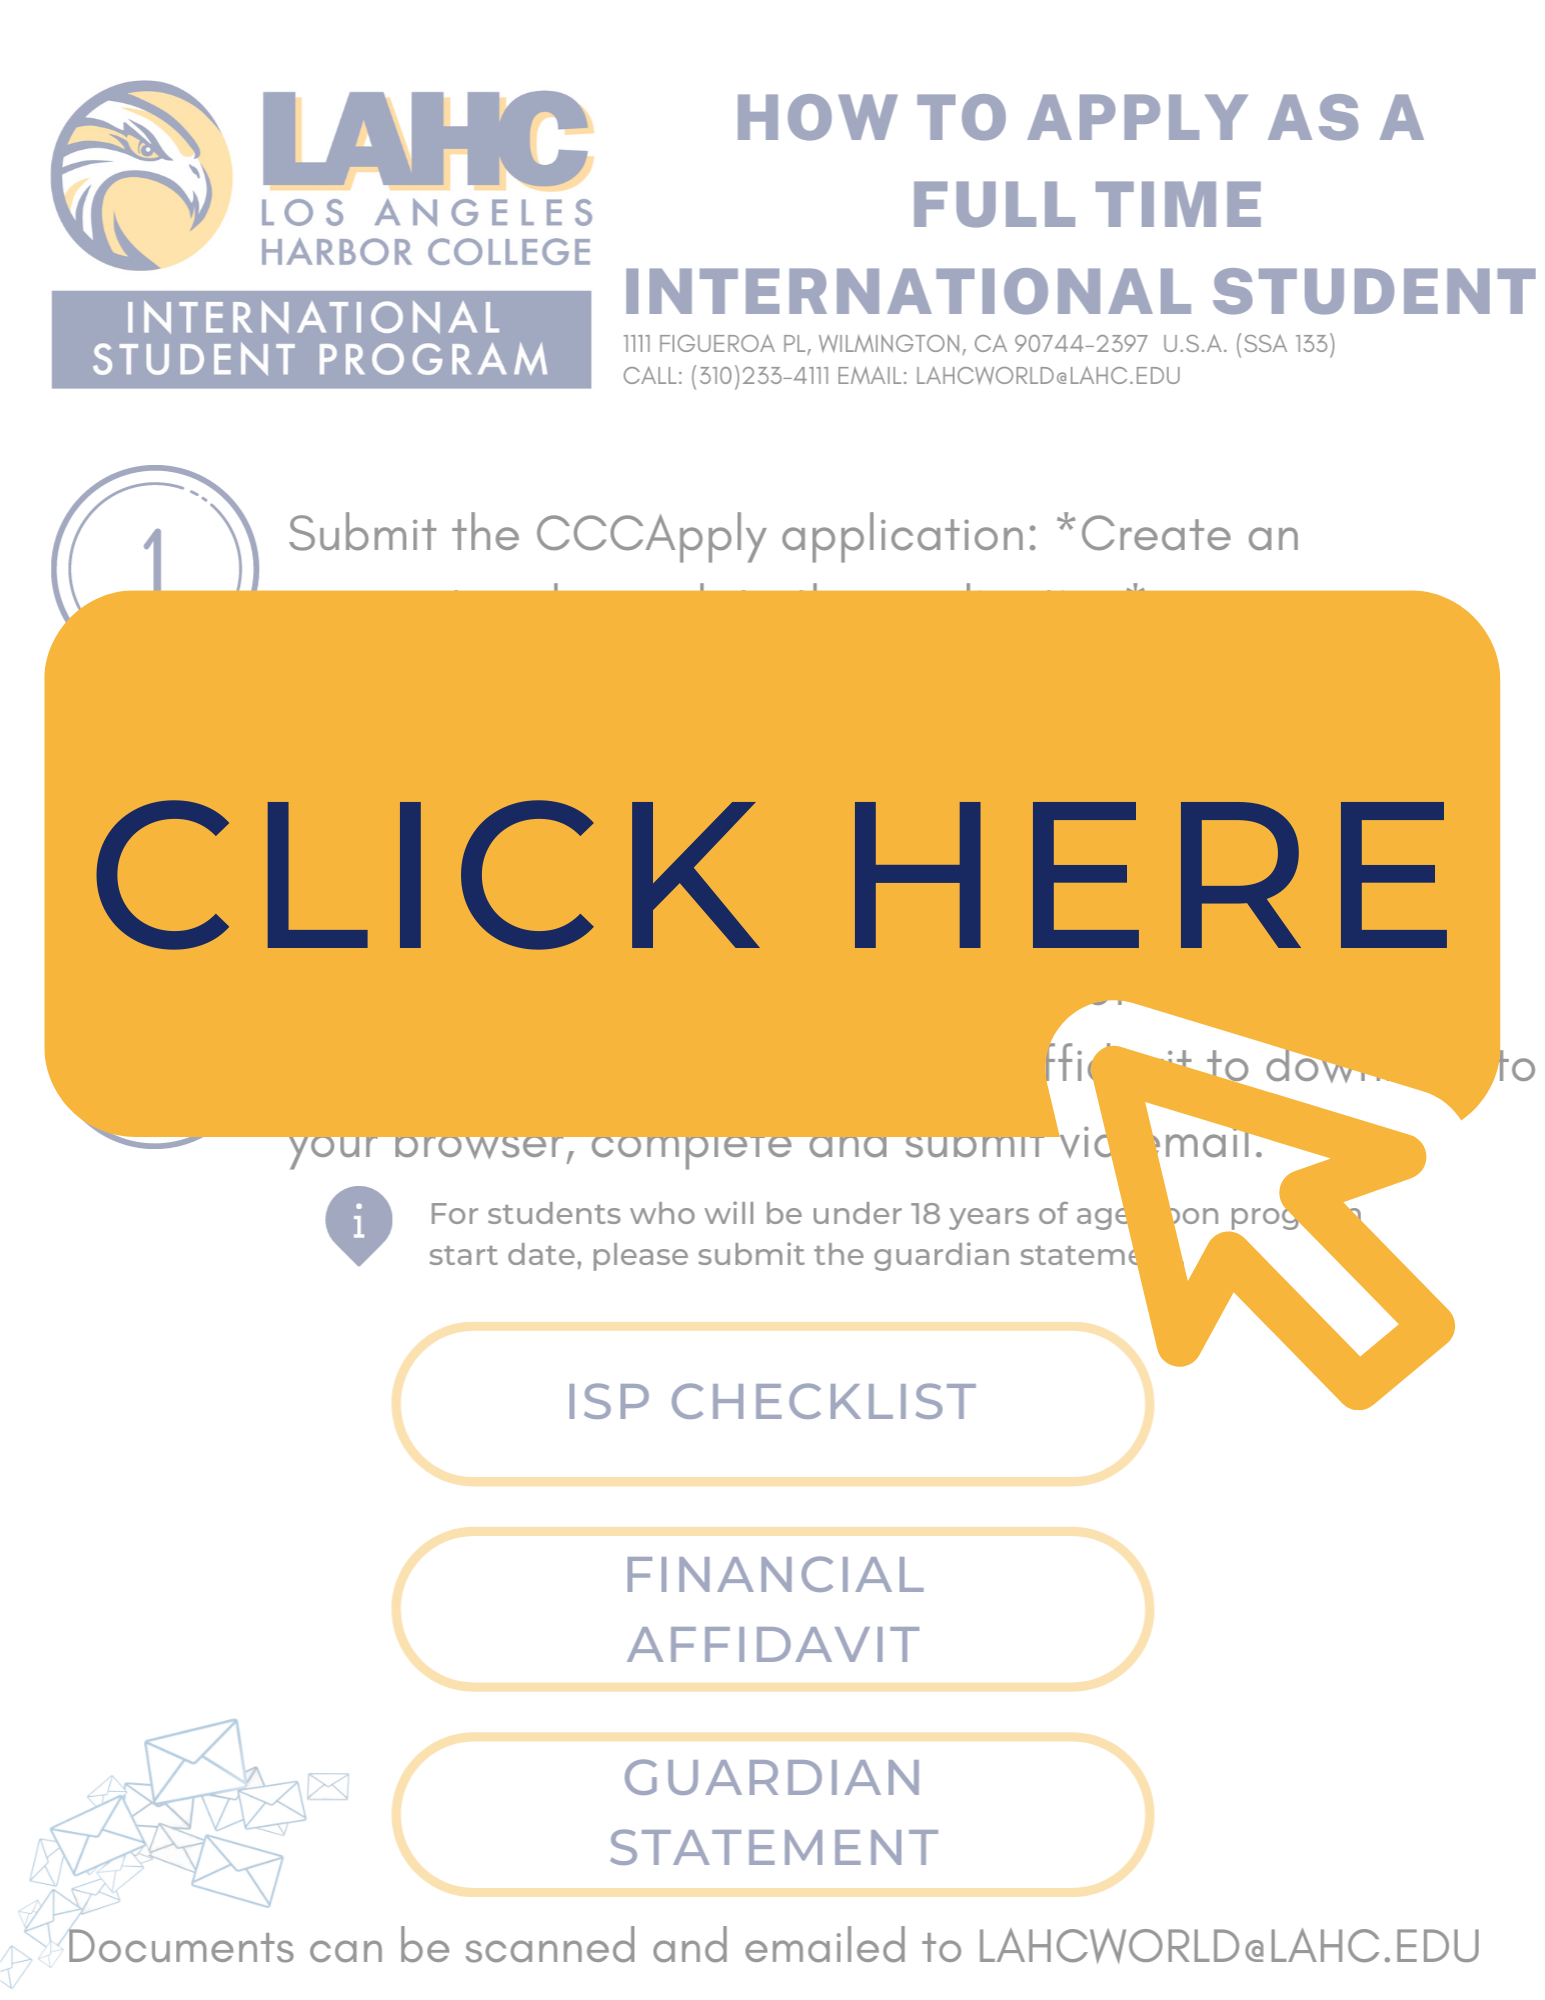 Apply as a Full Time International Student Button